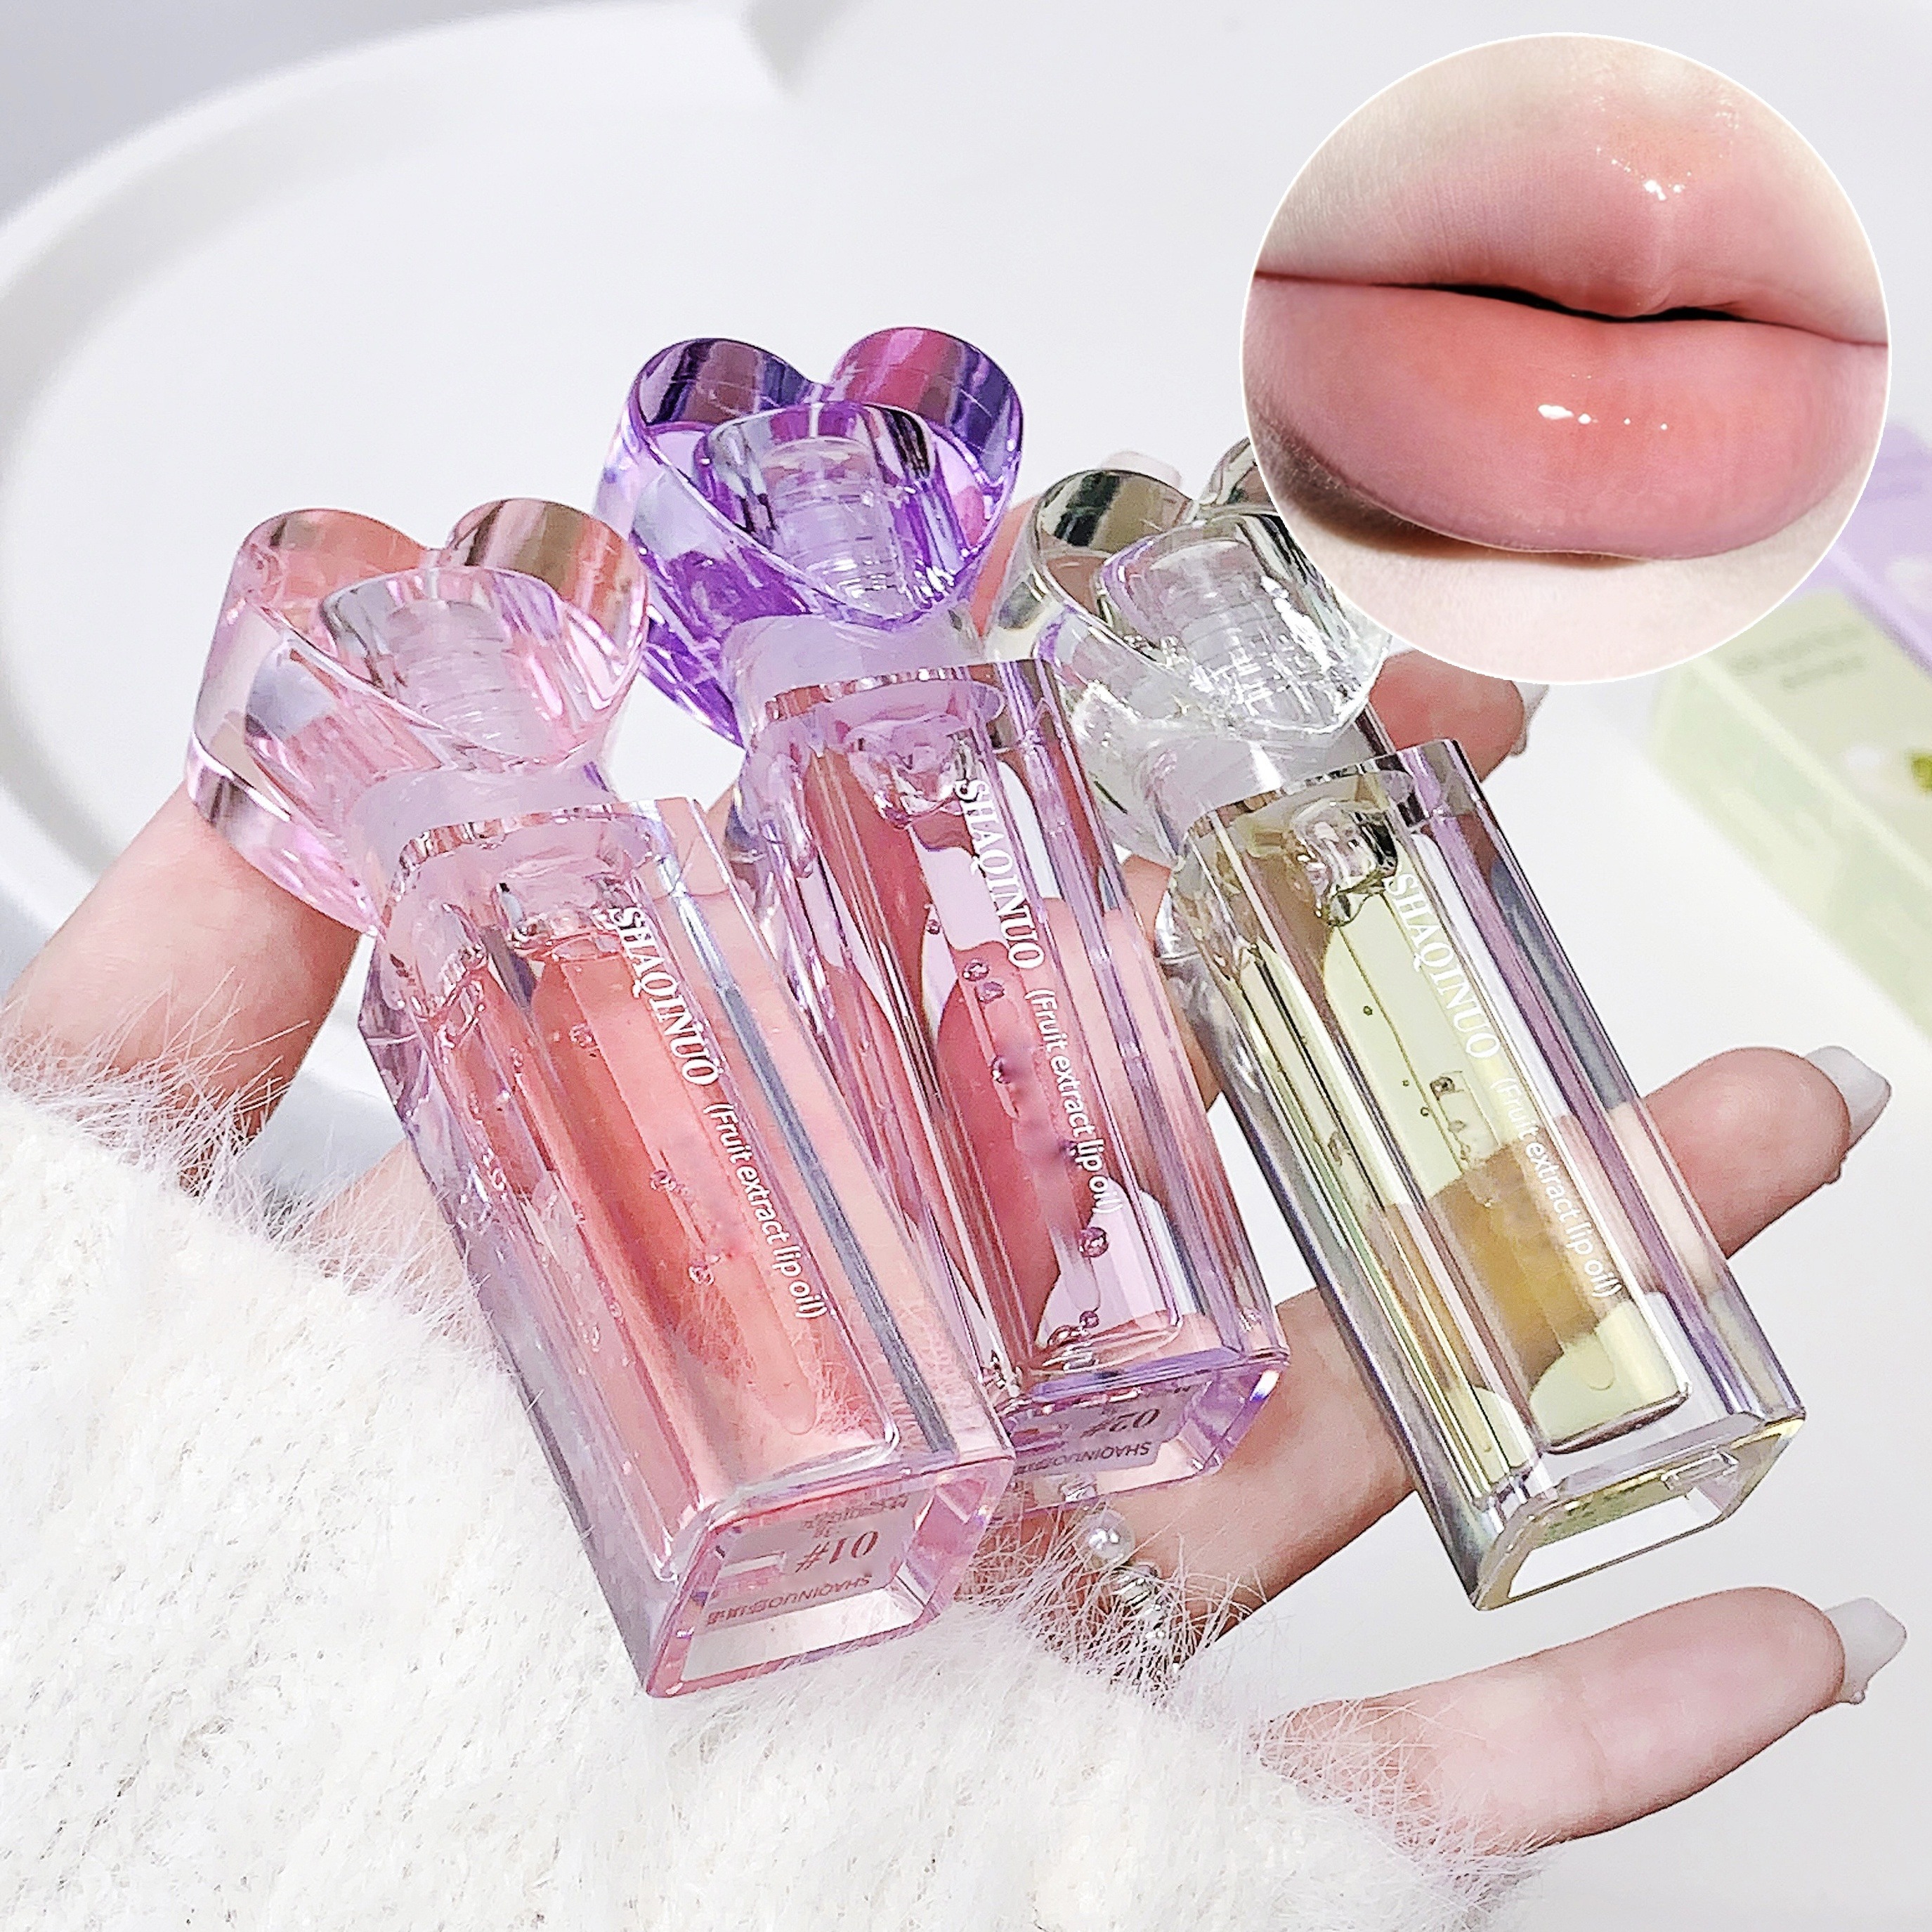 

Fruit-flavored Clear Lip Oil, Moisturizing Jelly Gloss Lip Color, Dewy Glass-look Lips, Peach & Grape Flavors Lip Moisturizer, Valentine's Day Gift